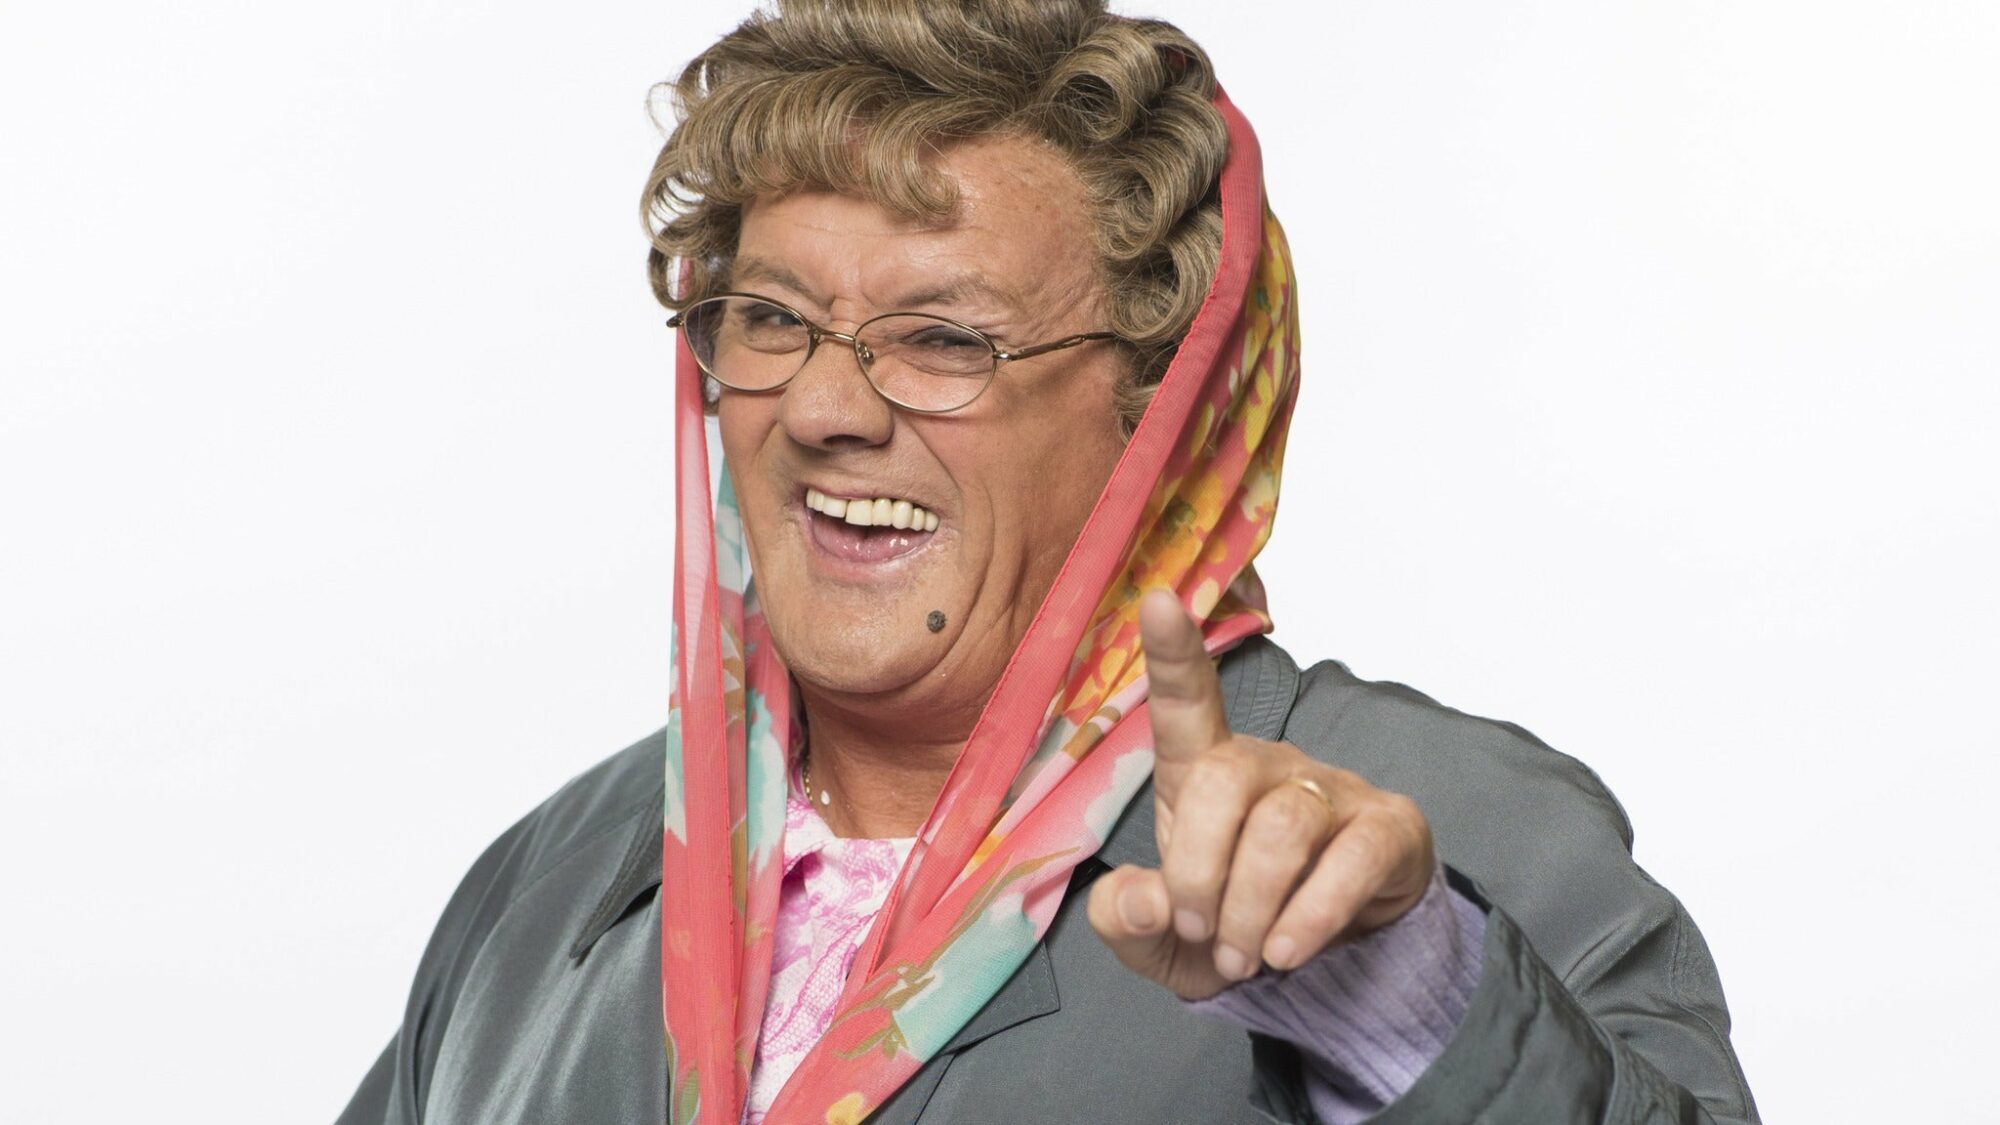 Image name Mrs Browns Boys Mrs Brown Rides Again at Bonus Arena Hull Hull the 22 image from the post Mrs Brown's Boys - Mrs Brown Rides Again at Connexin Live, Hull in Yorkshire.com.